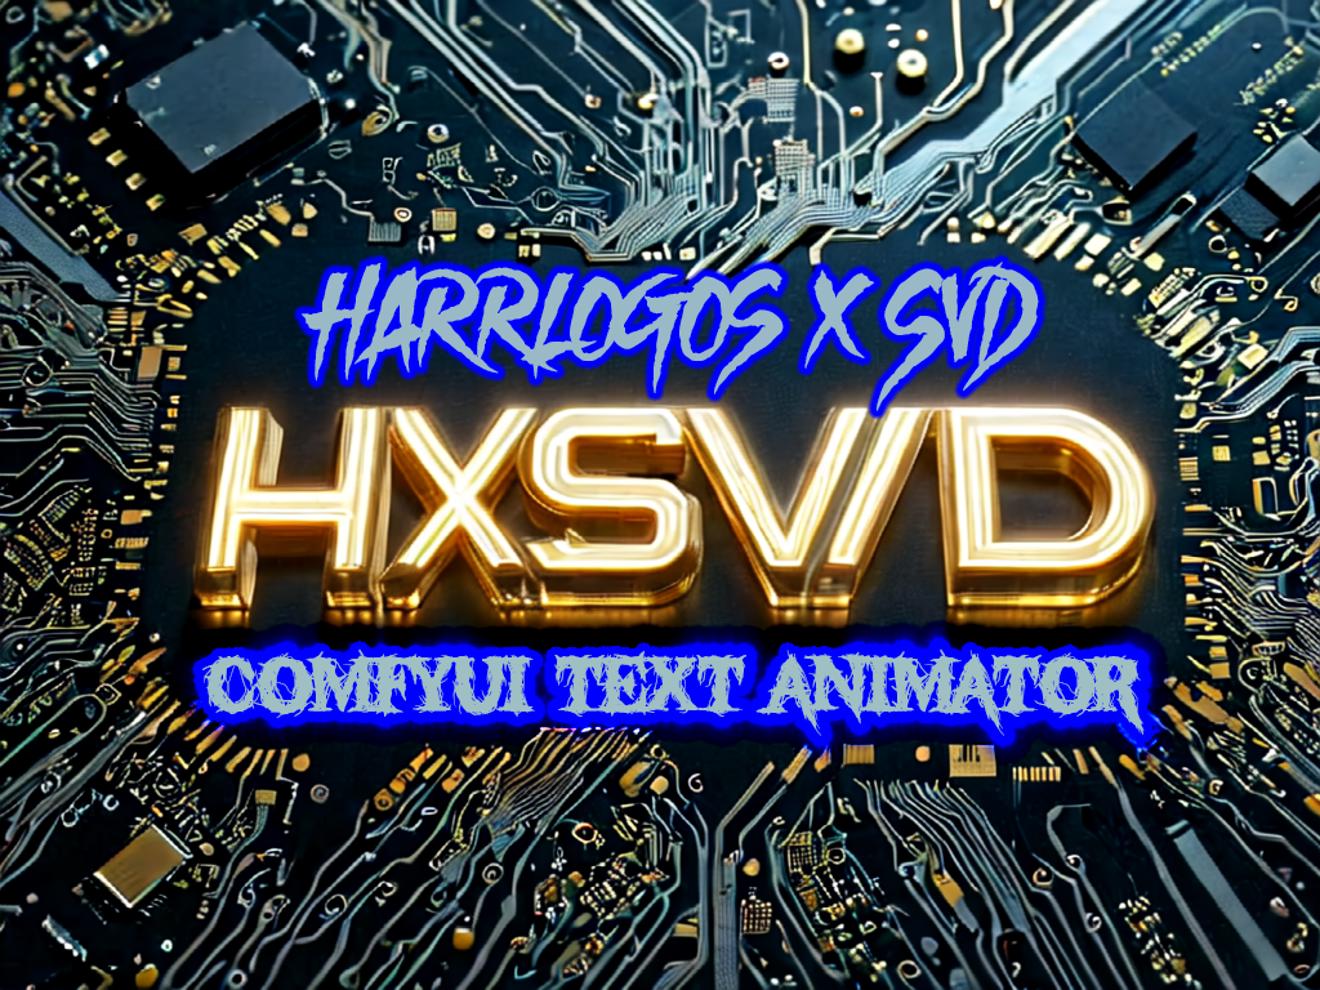 HxSVD - HarrlogosxSVD txt2video ComfyUI Workflow - Generate and Animate Text with SVD! (v2 OUT NOW!)